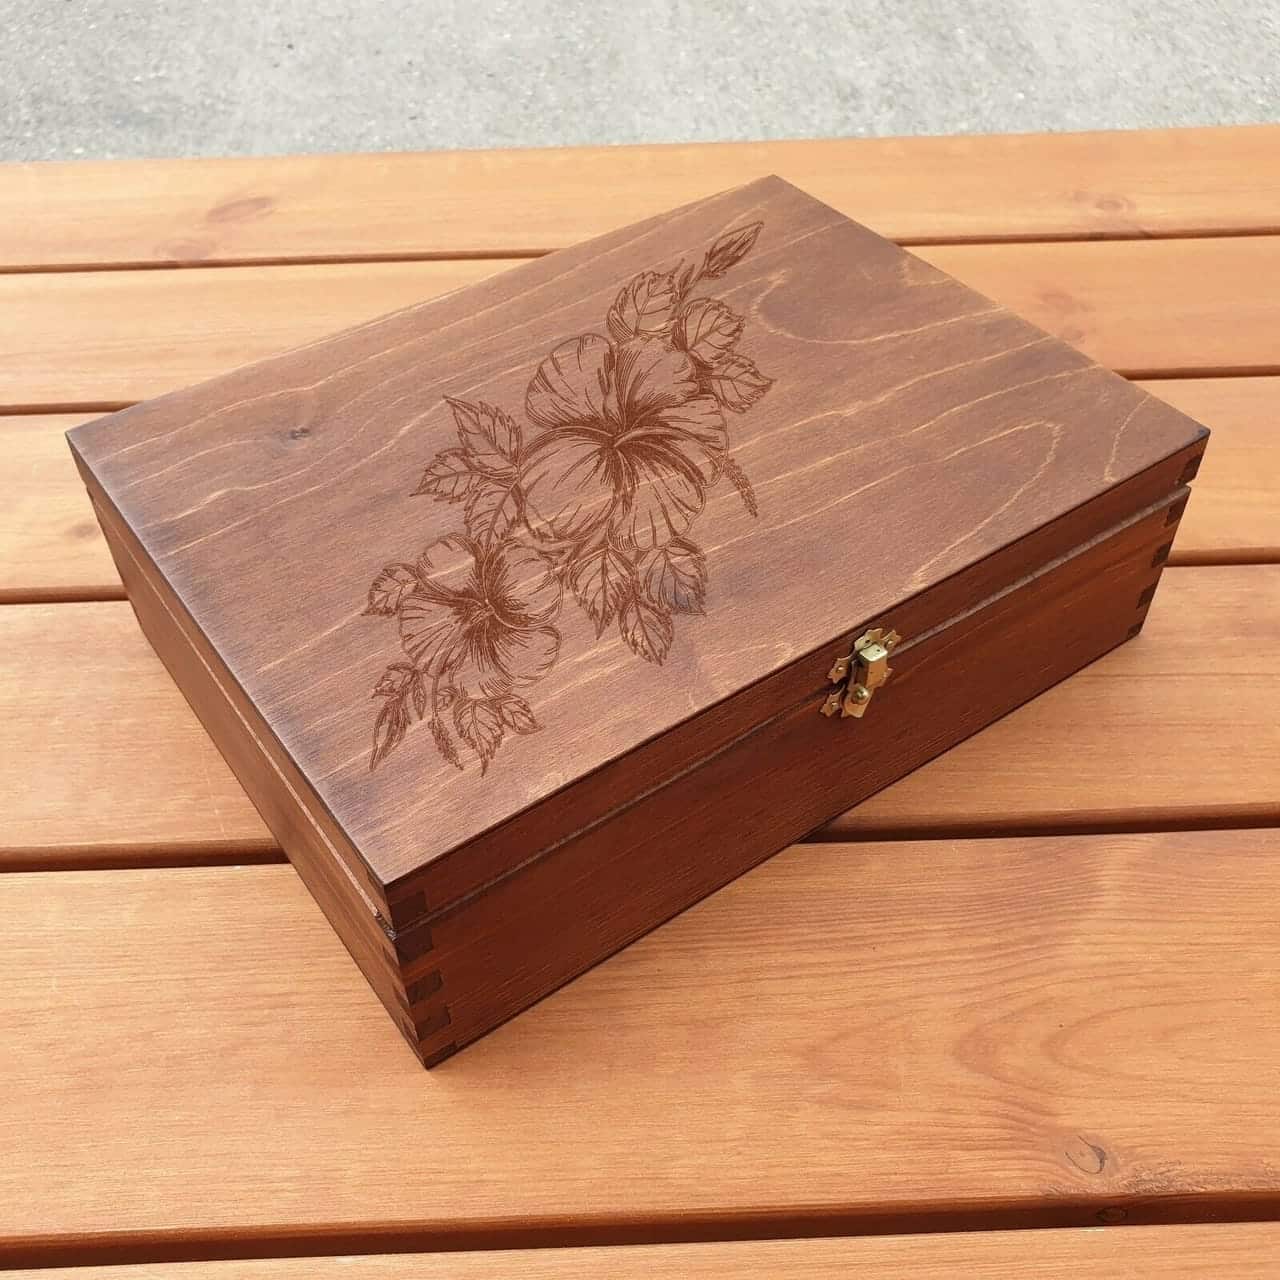 Floral Art on the Box Laser Engraving File